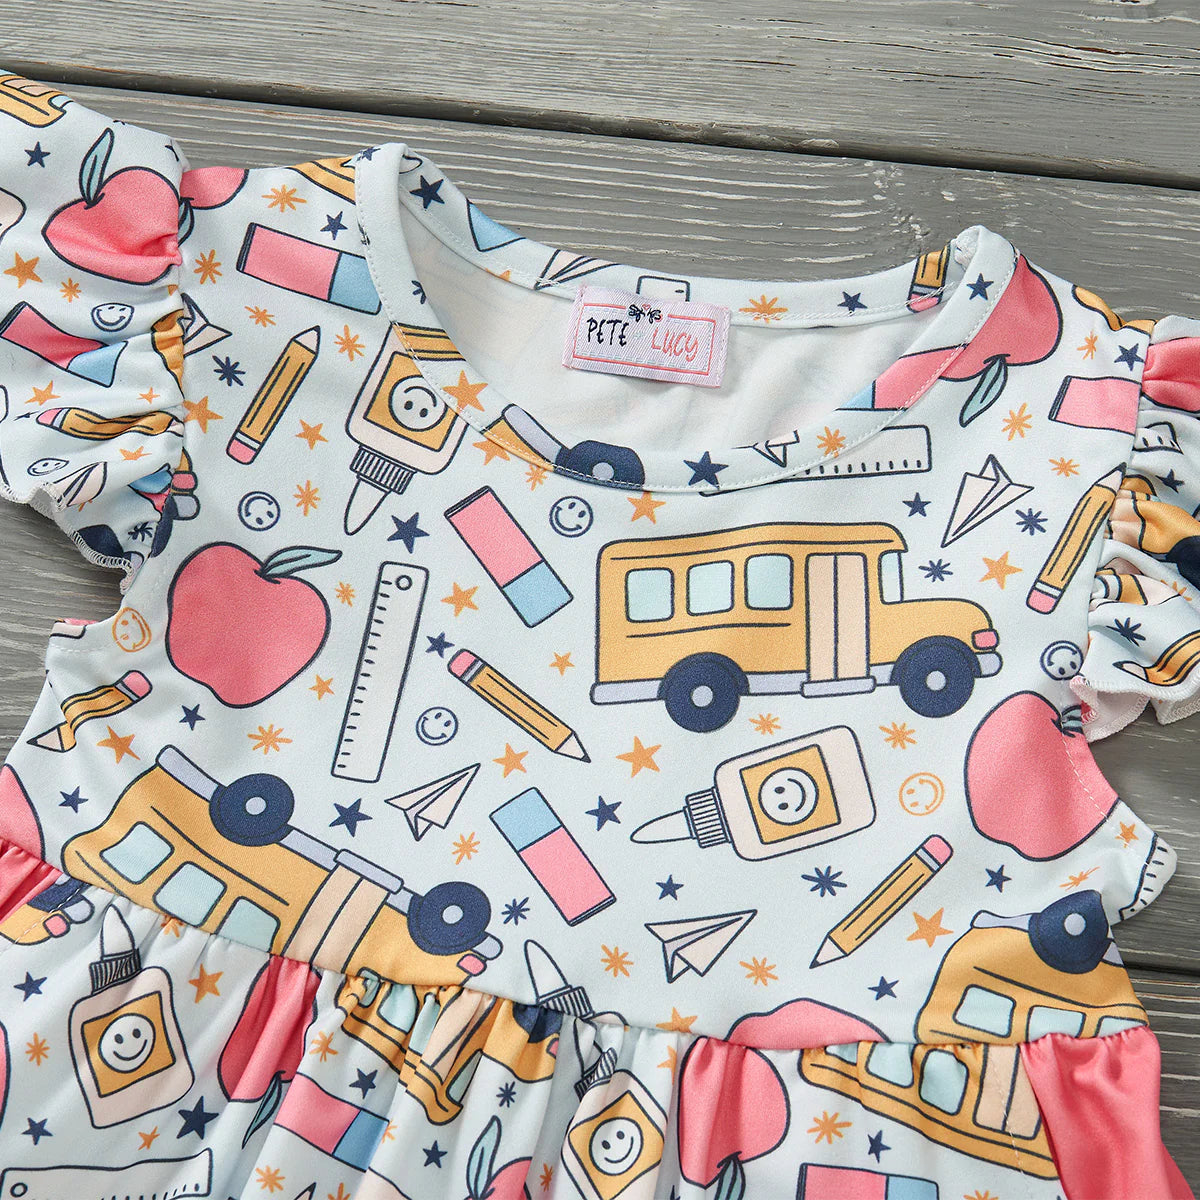 (Preorder) School Days Pant Set by Pete + Lucy